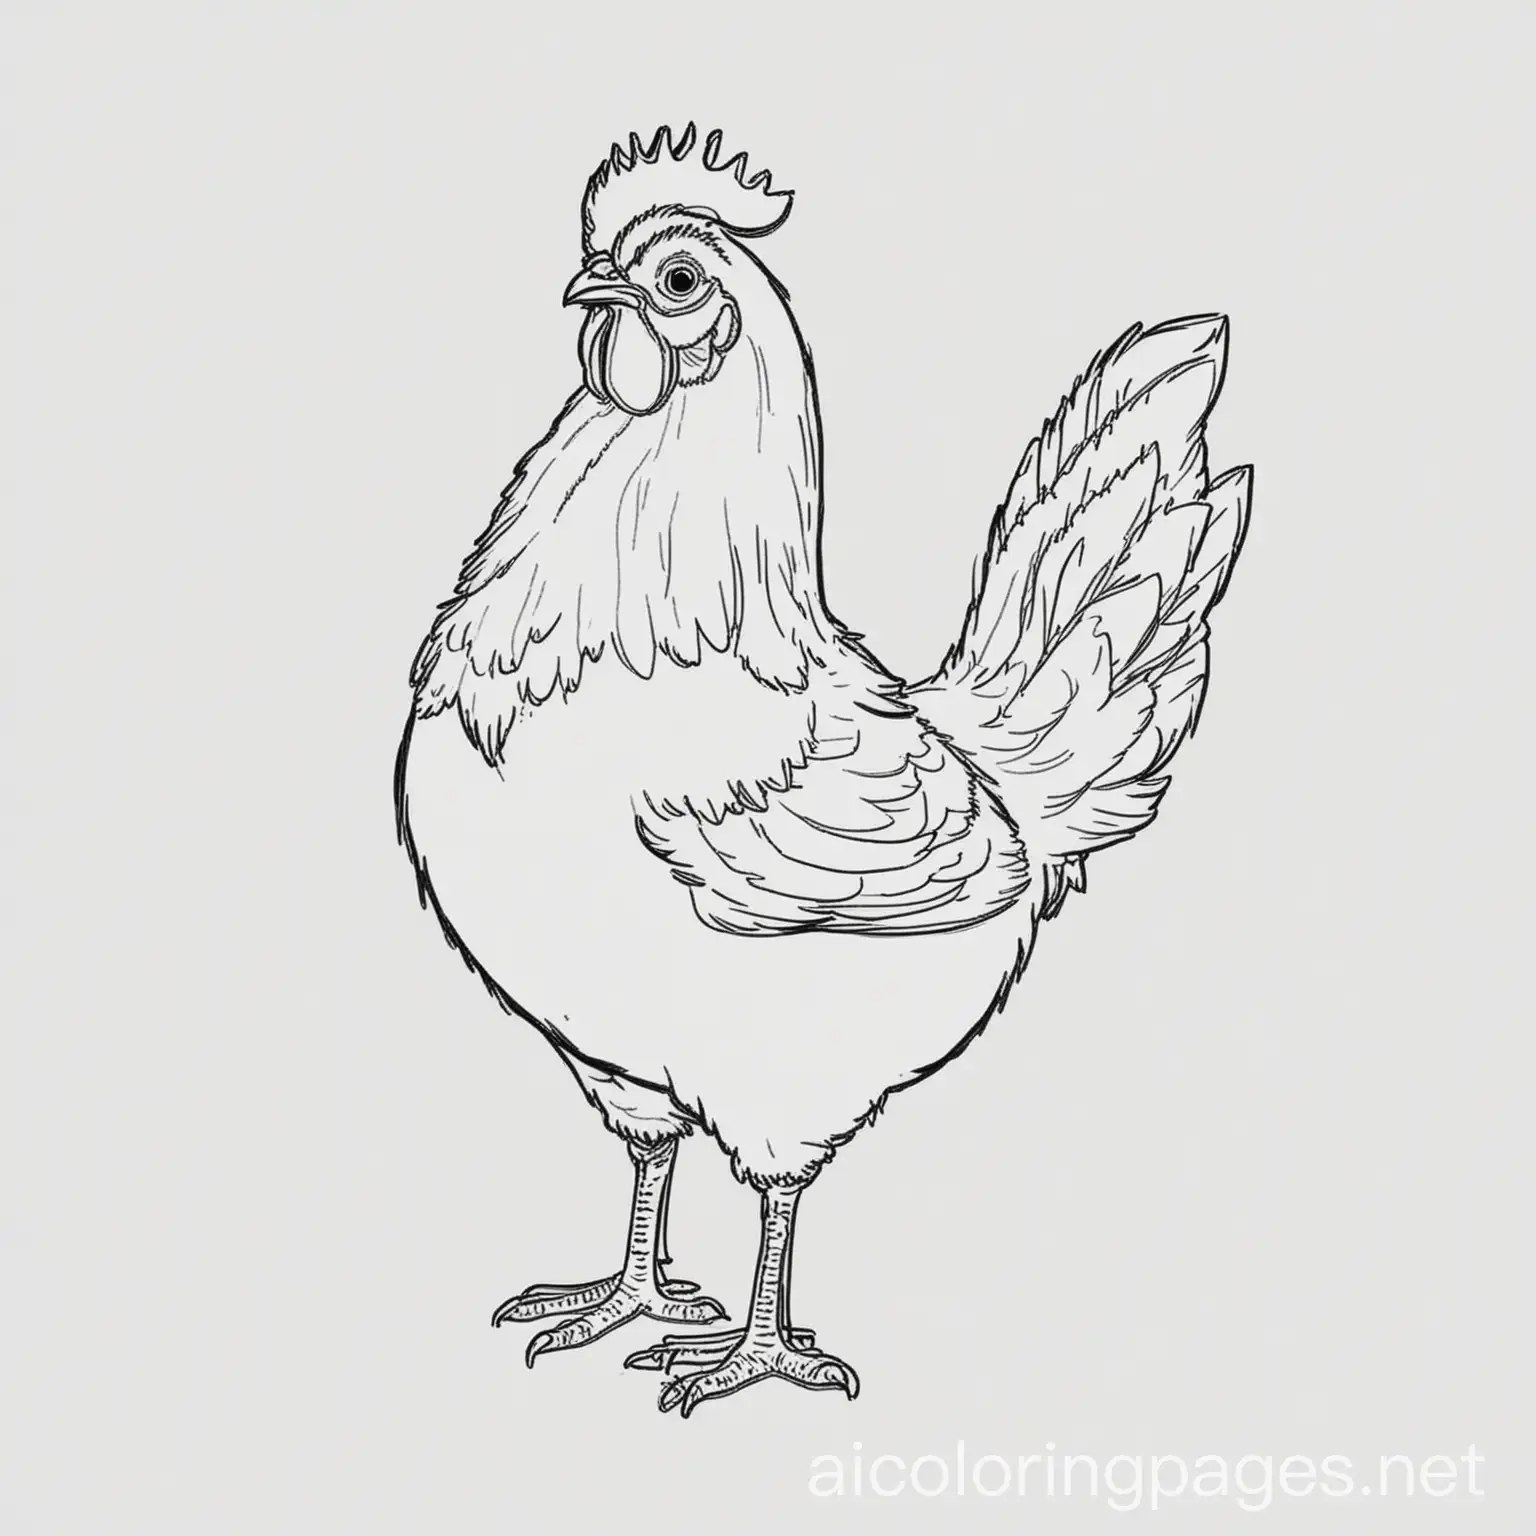 Hen, Coloring Page, black and white, line art, white background, Simplicity, Ample White Space. The background of the coloring page is plain white to make it easy for young children to color within the lines. The outlines of all the subjects are easy to distinguish, making it simple for kids to color without too much difficulty